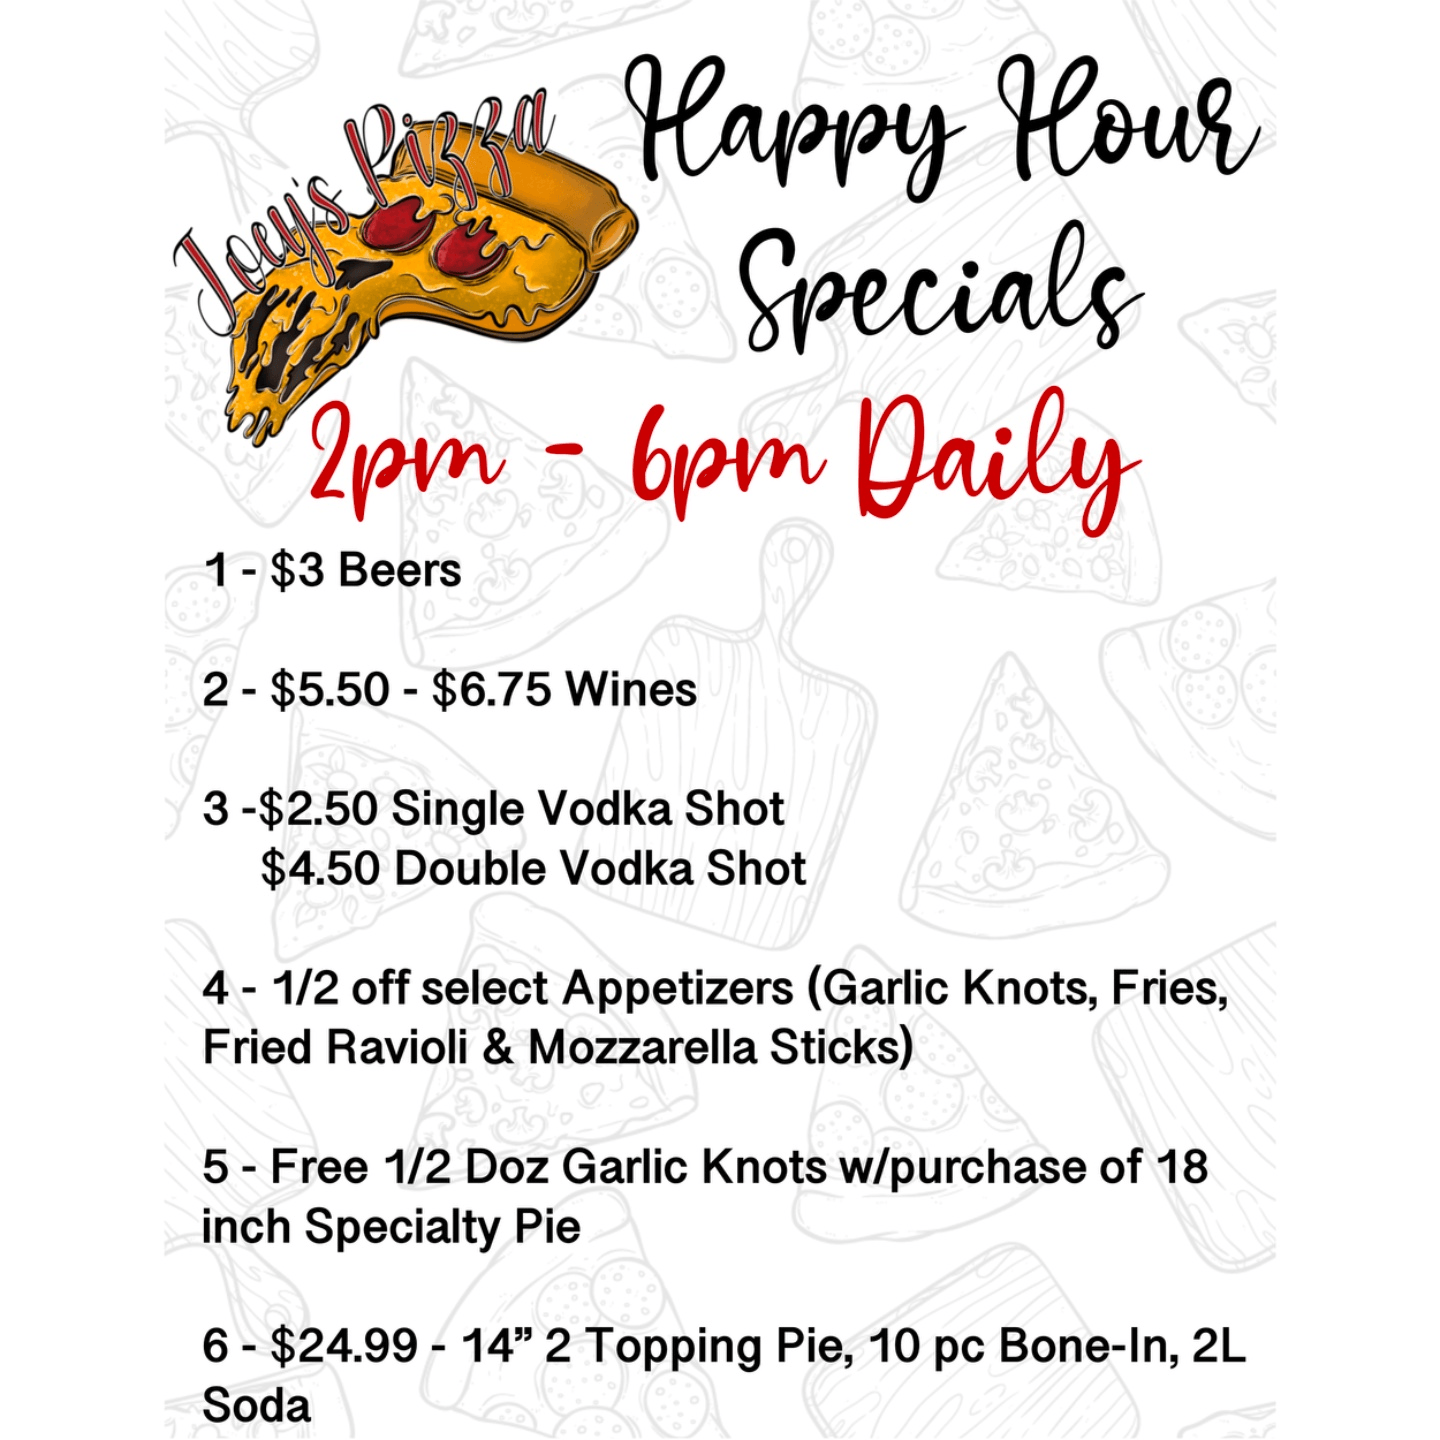 Happy Hour Specials: (In-Store) 2pm - 6pm Daily